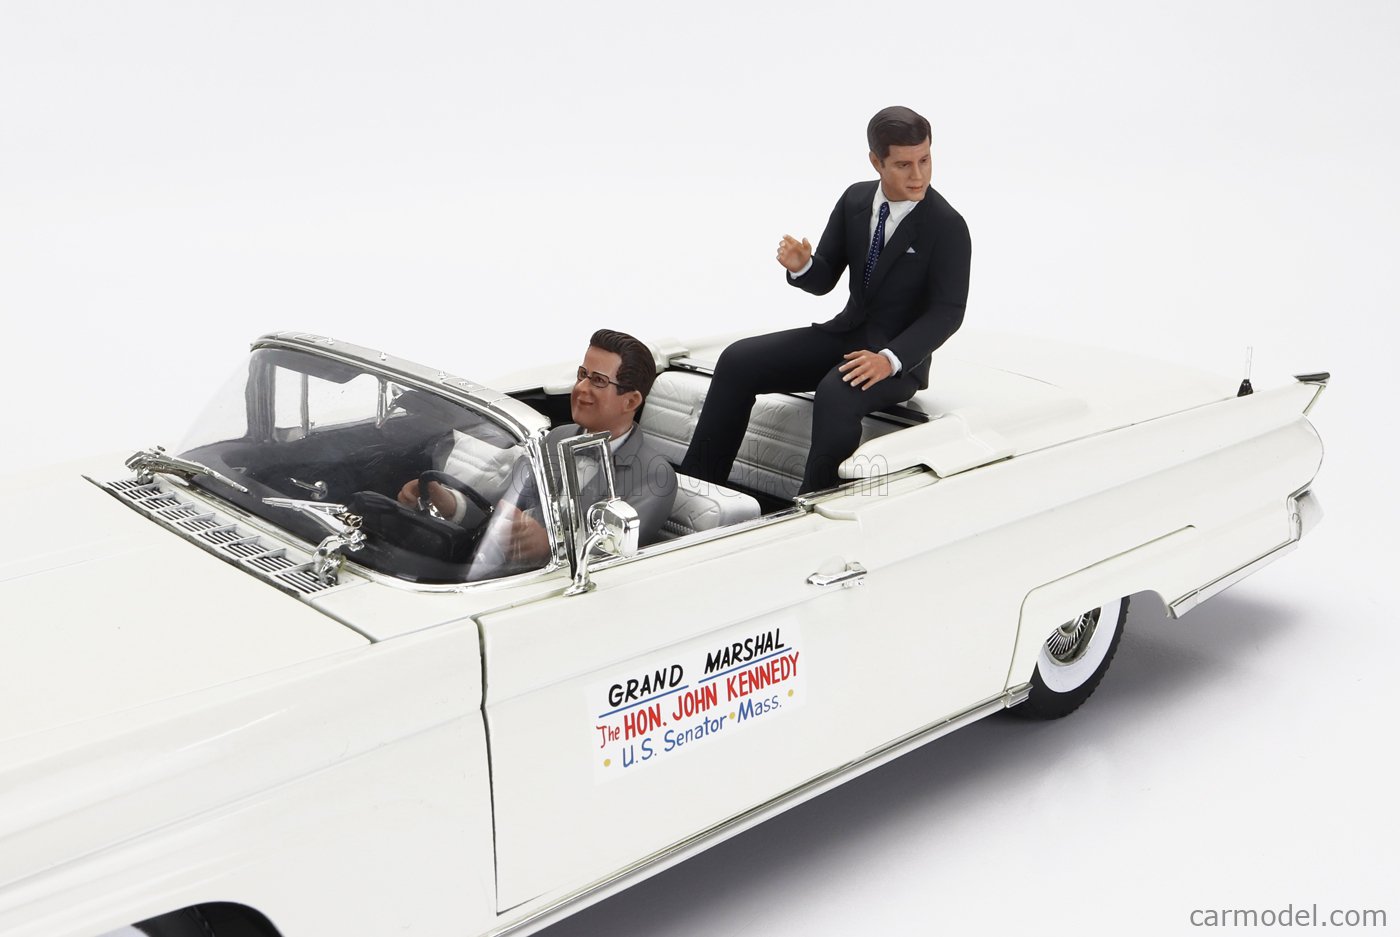 SUN-STAR 04707 Scala 1/18  LINCOLN CONTINENTAL MKIII CABRIOLET OPEN WITH JOHN F.KENNEDY FIGURE IN OREGON 1960 WHITE